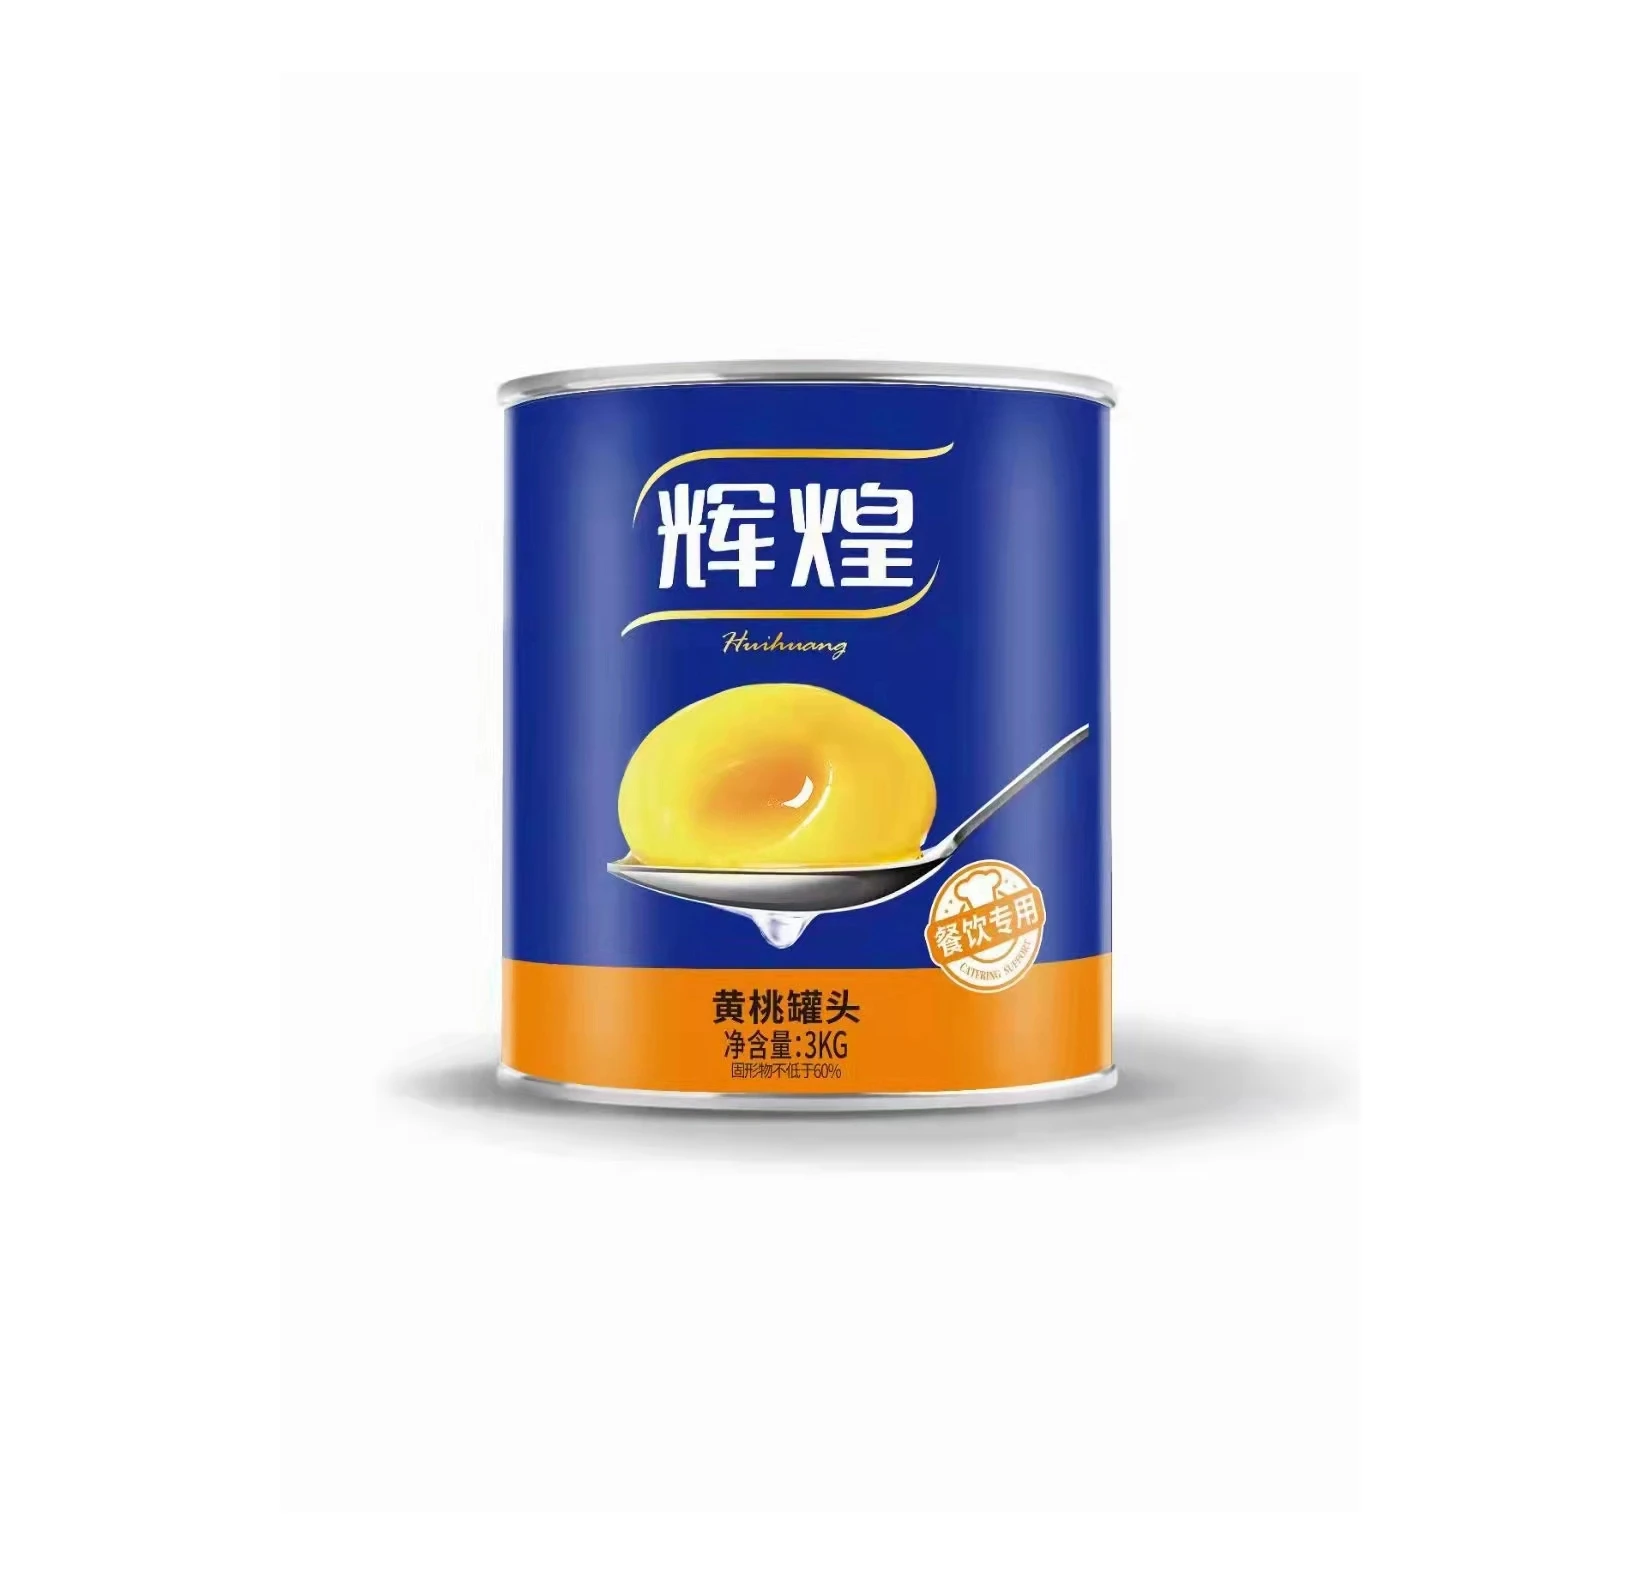 Large Tasty Seal Yellow Peach Cylindrical Food Grade Fruit Juice Drink Tin Cans (1600403422955)